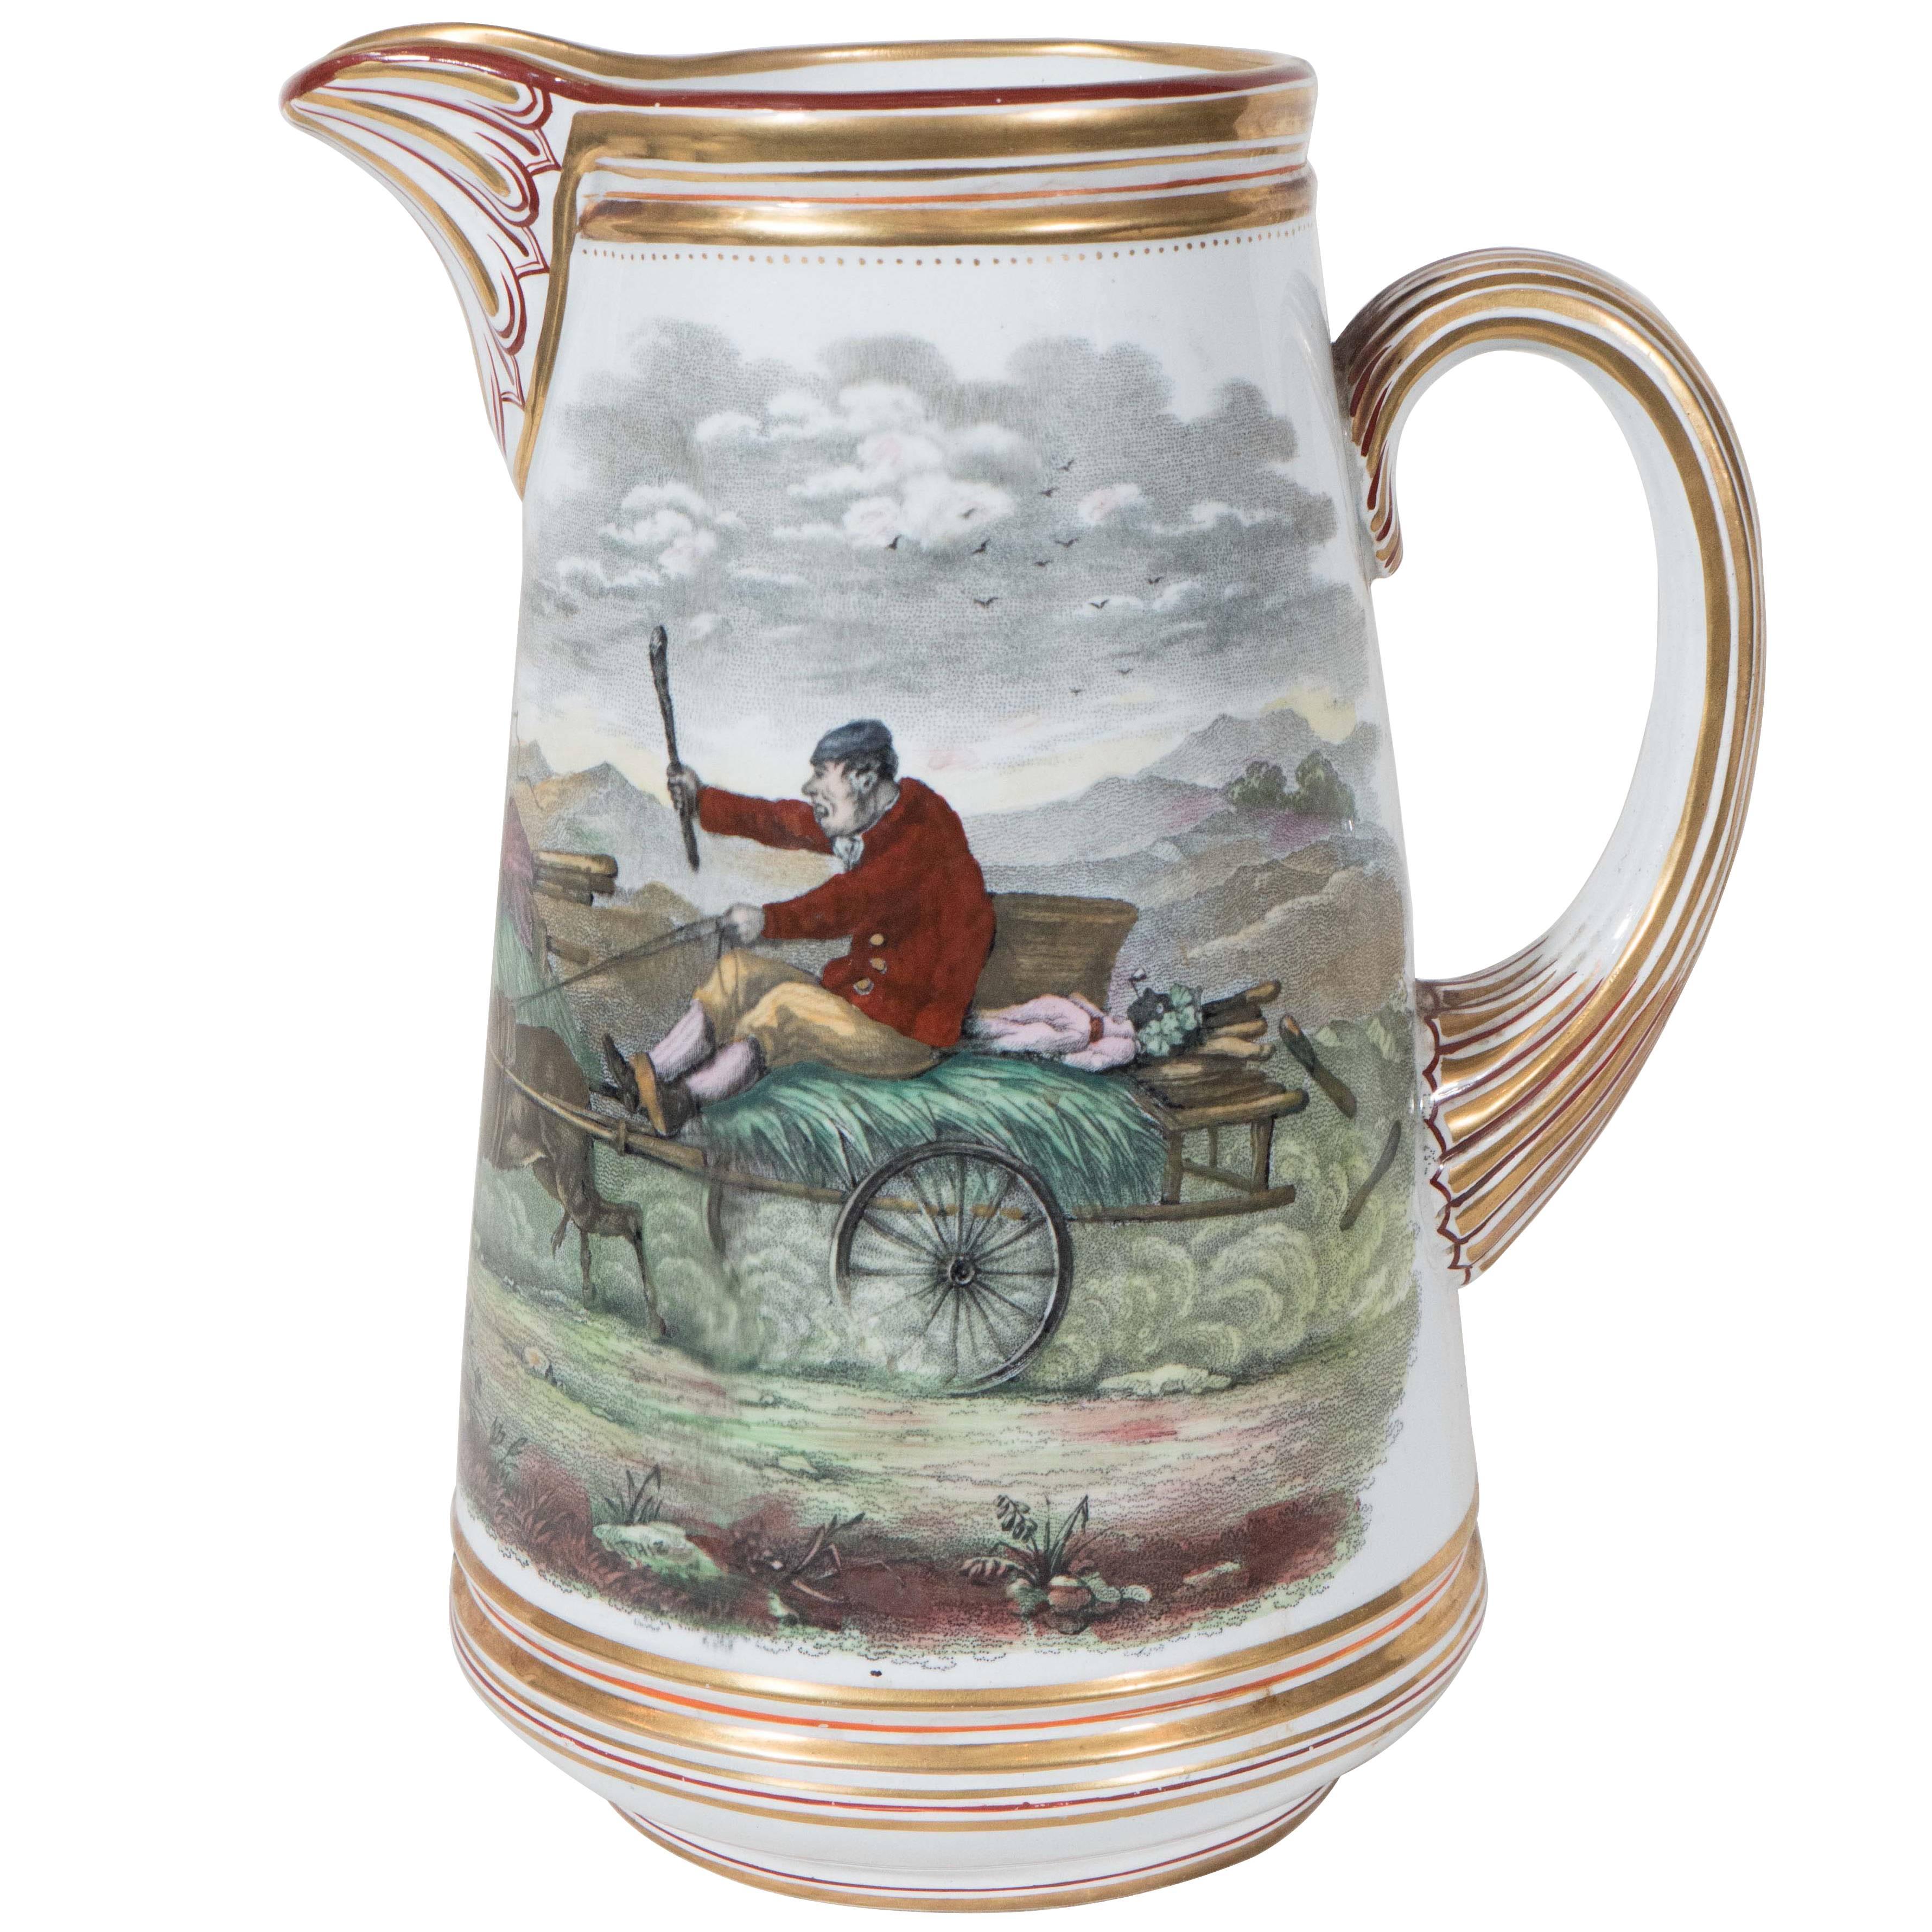 Antique Copeland Jug "Going to the Derby”